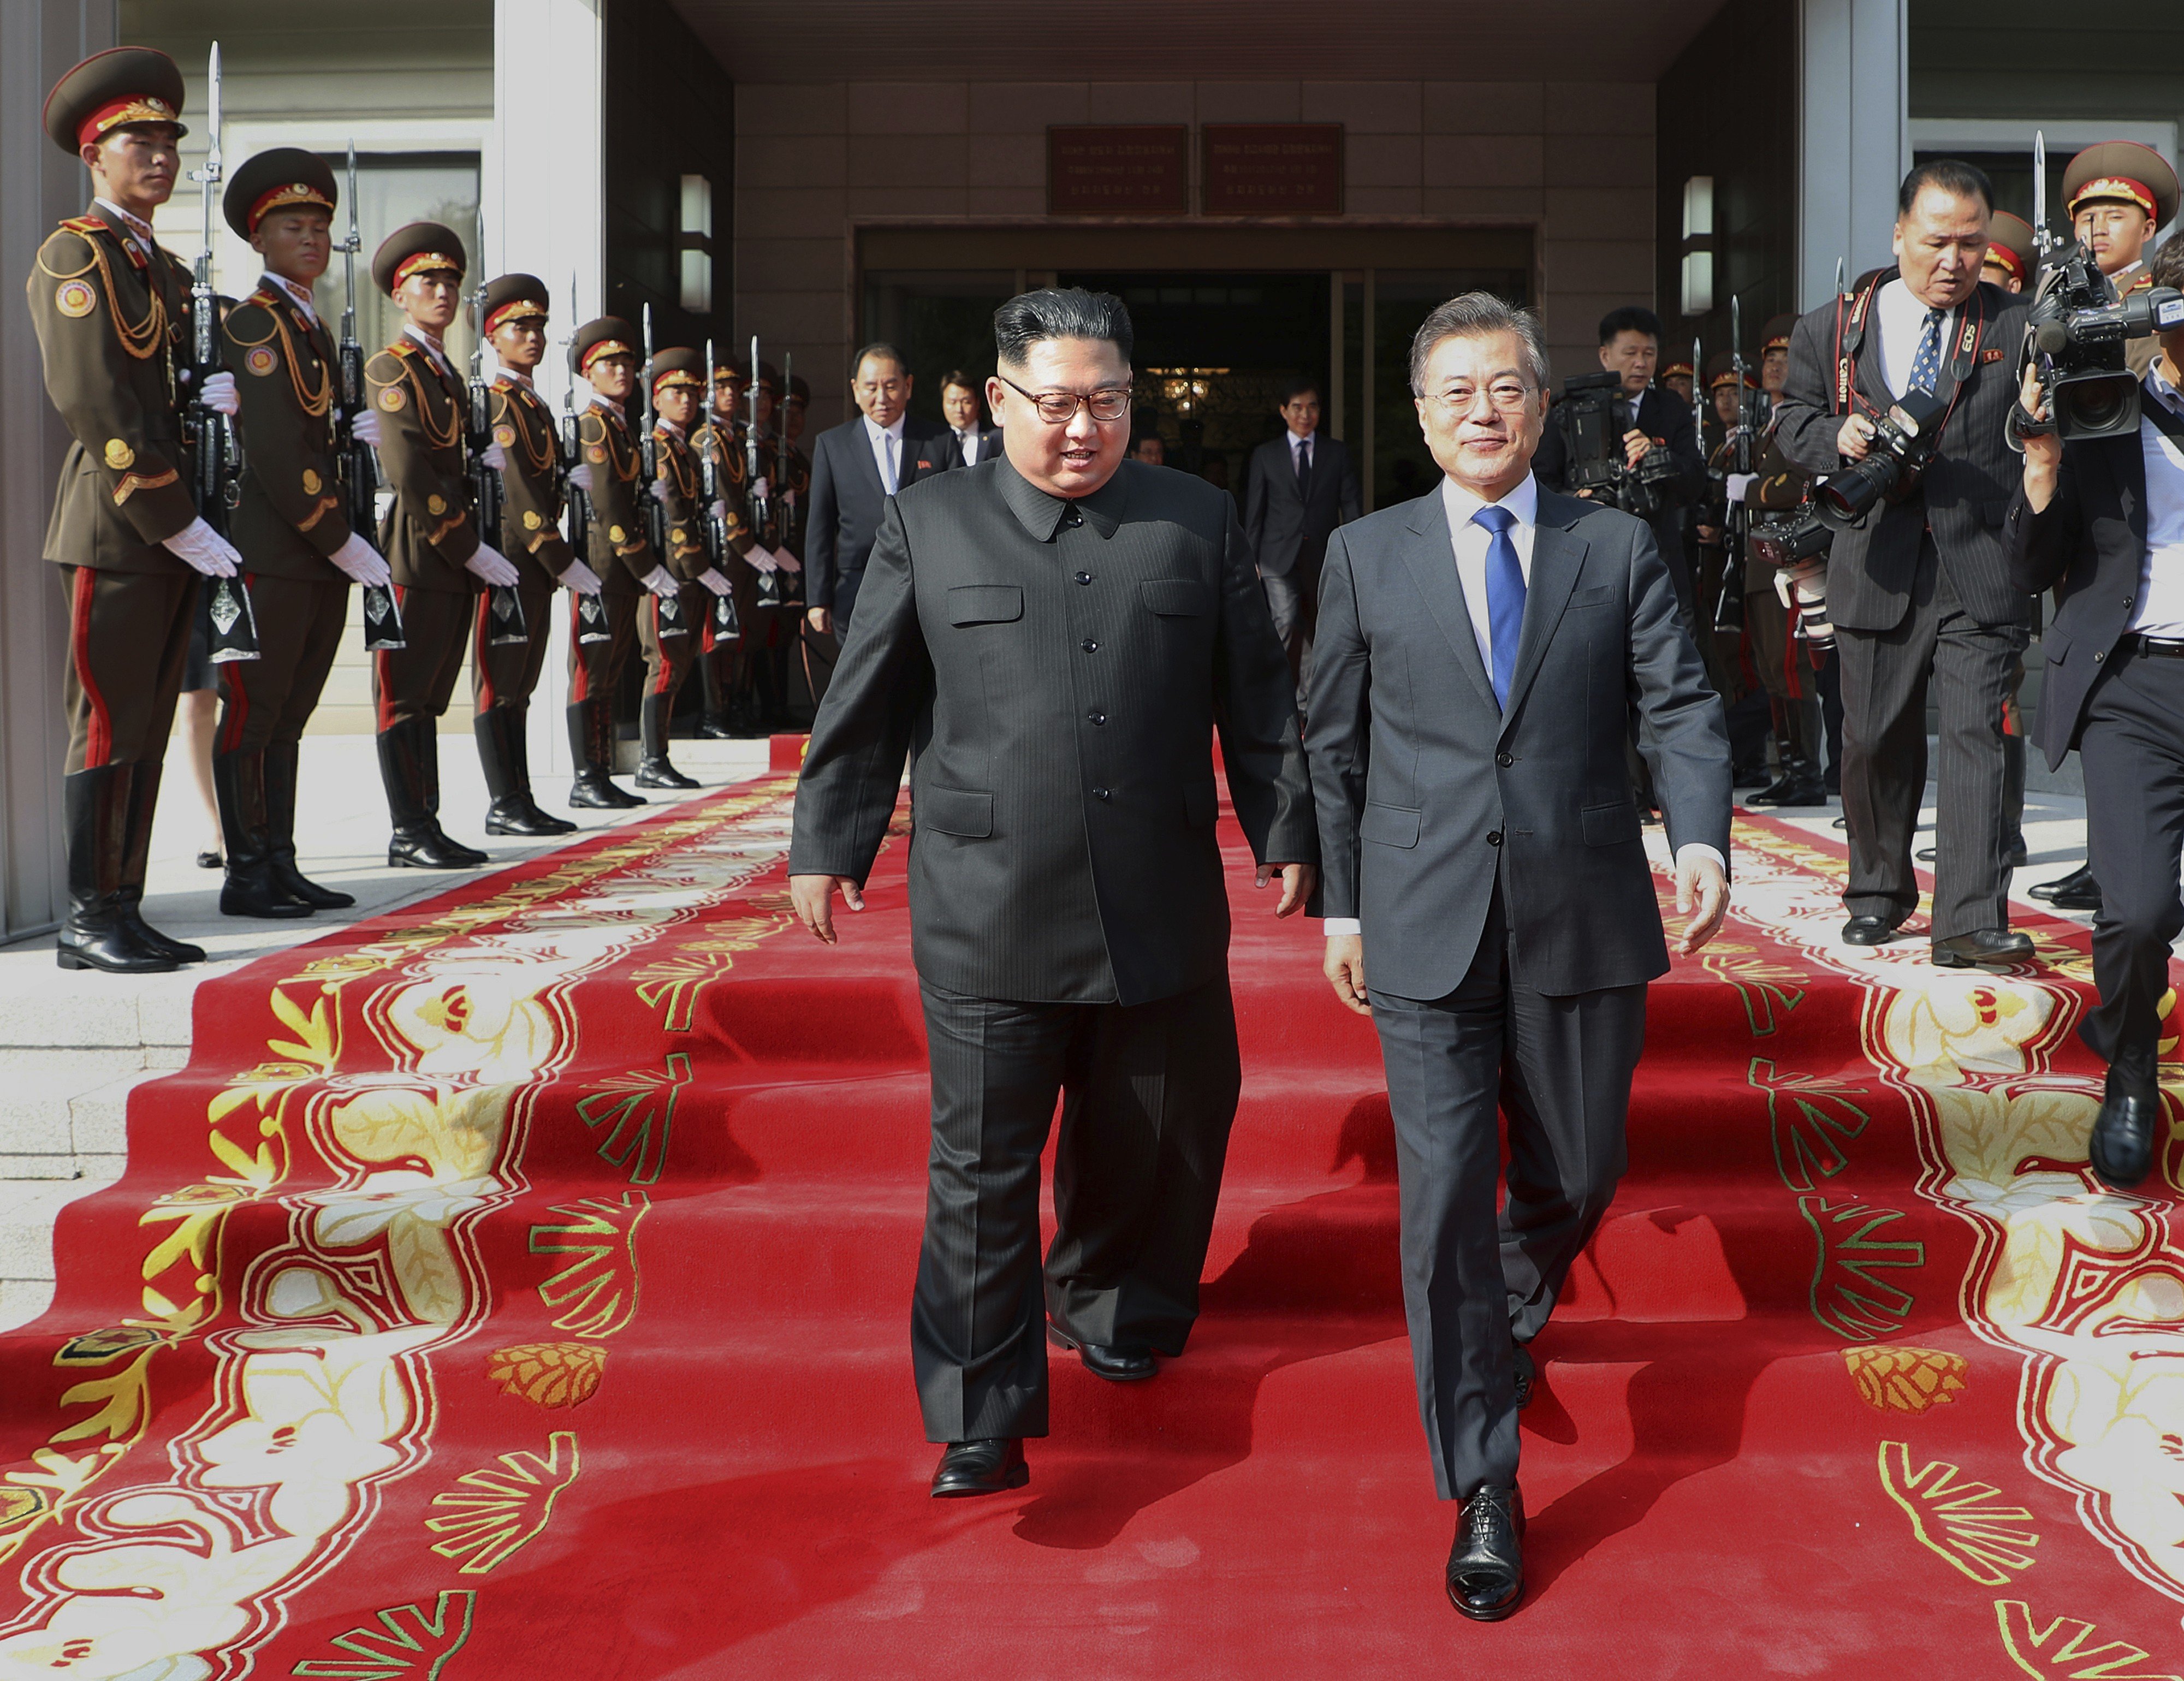 North Korean leader Kim Jong-un walks with South Korea President Moon Jae-in after their meeting at the northern side of Panmunjom in North Korea in March 2018. Photo: South Korea Presidential Blue House via AP